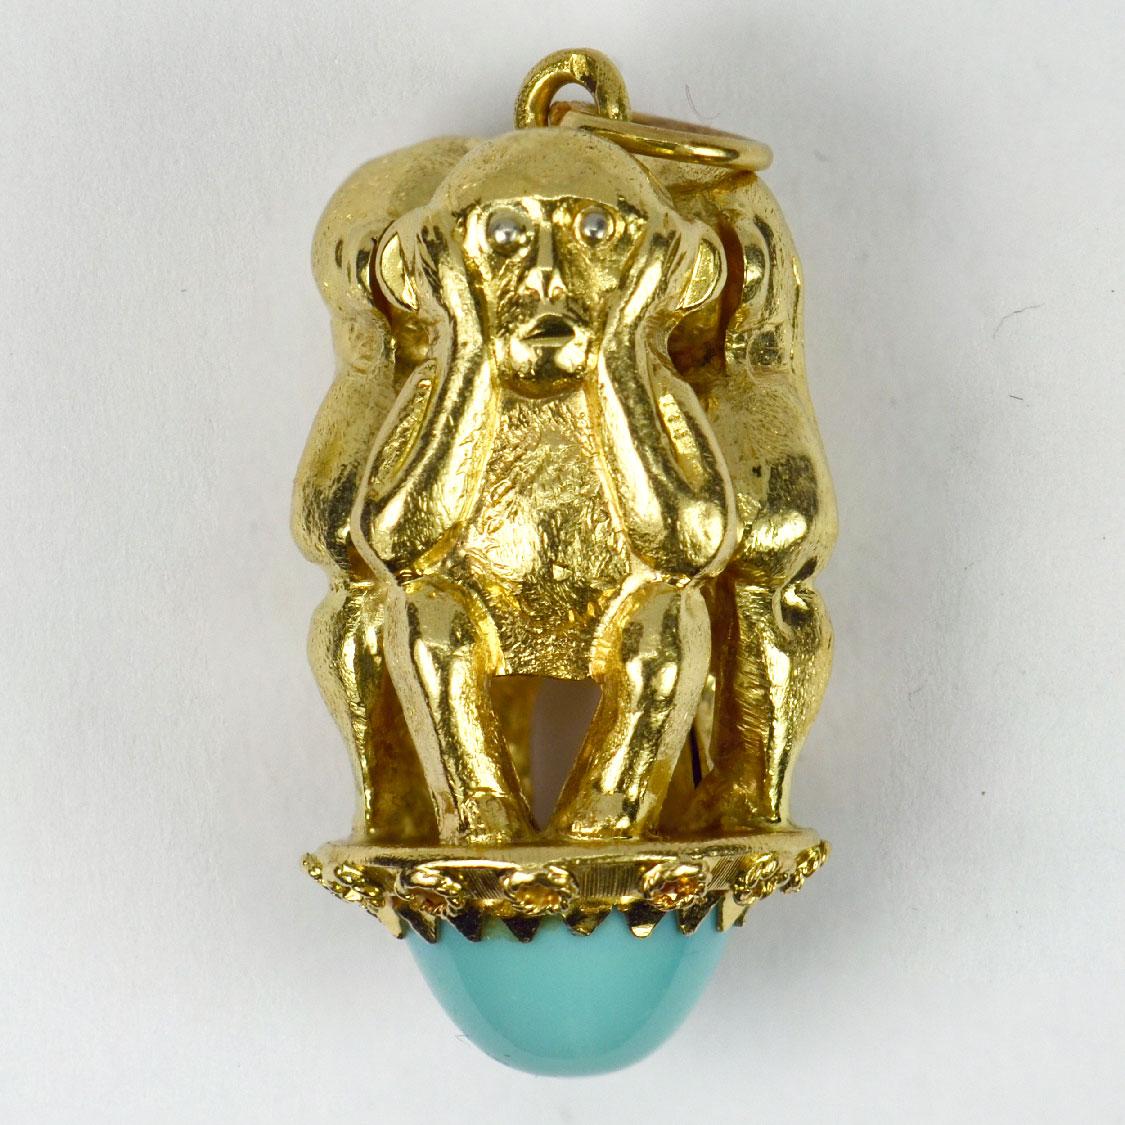 An 18 karat (18K) yellow gold charm pendant designed as the three wise monkeys covering their eyes, ears and mouth, symbolising the mantra ‘See no evil, hear no evil, speak no evil’. The monkeys stand atop a large turquoise cabochon estimated to